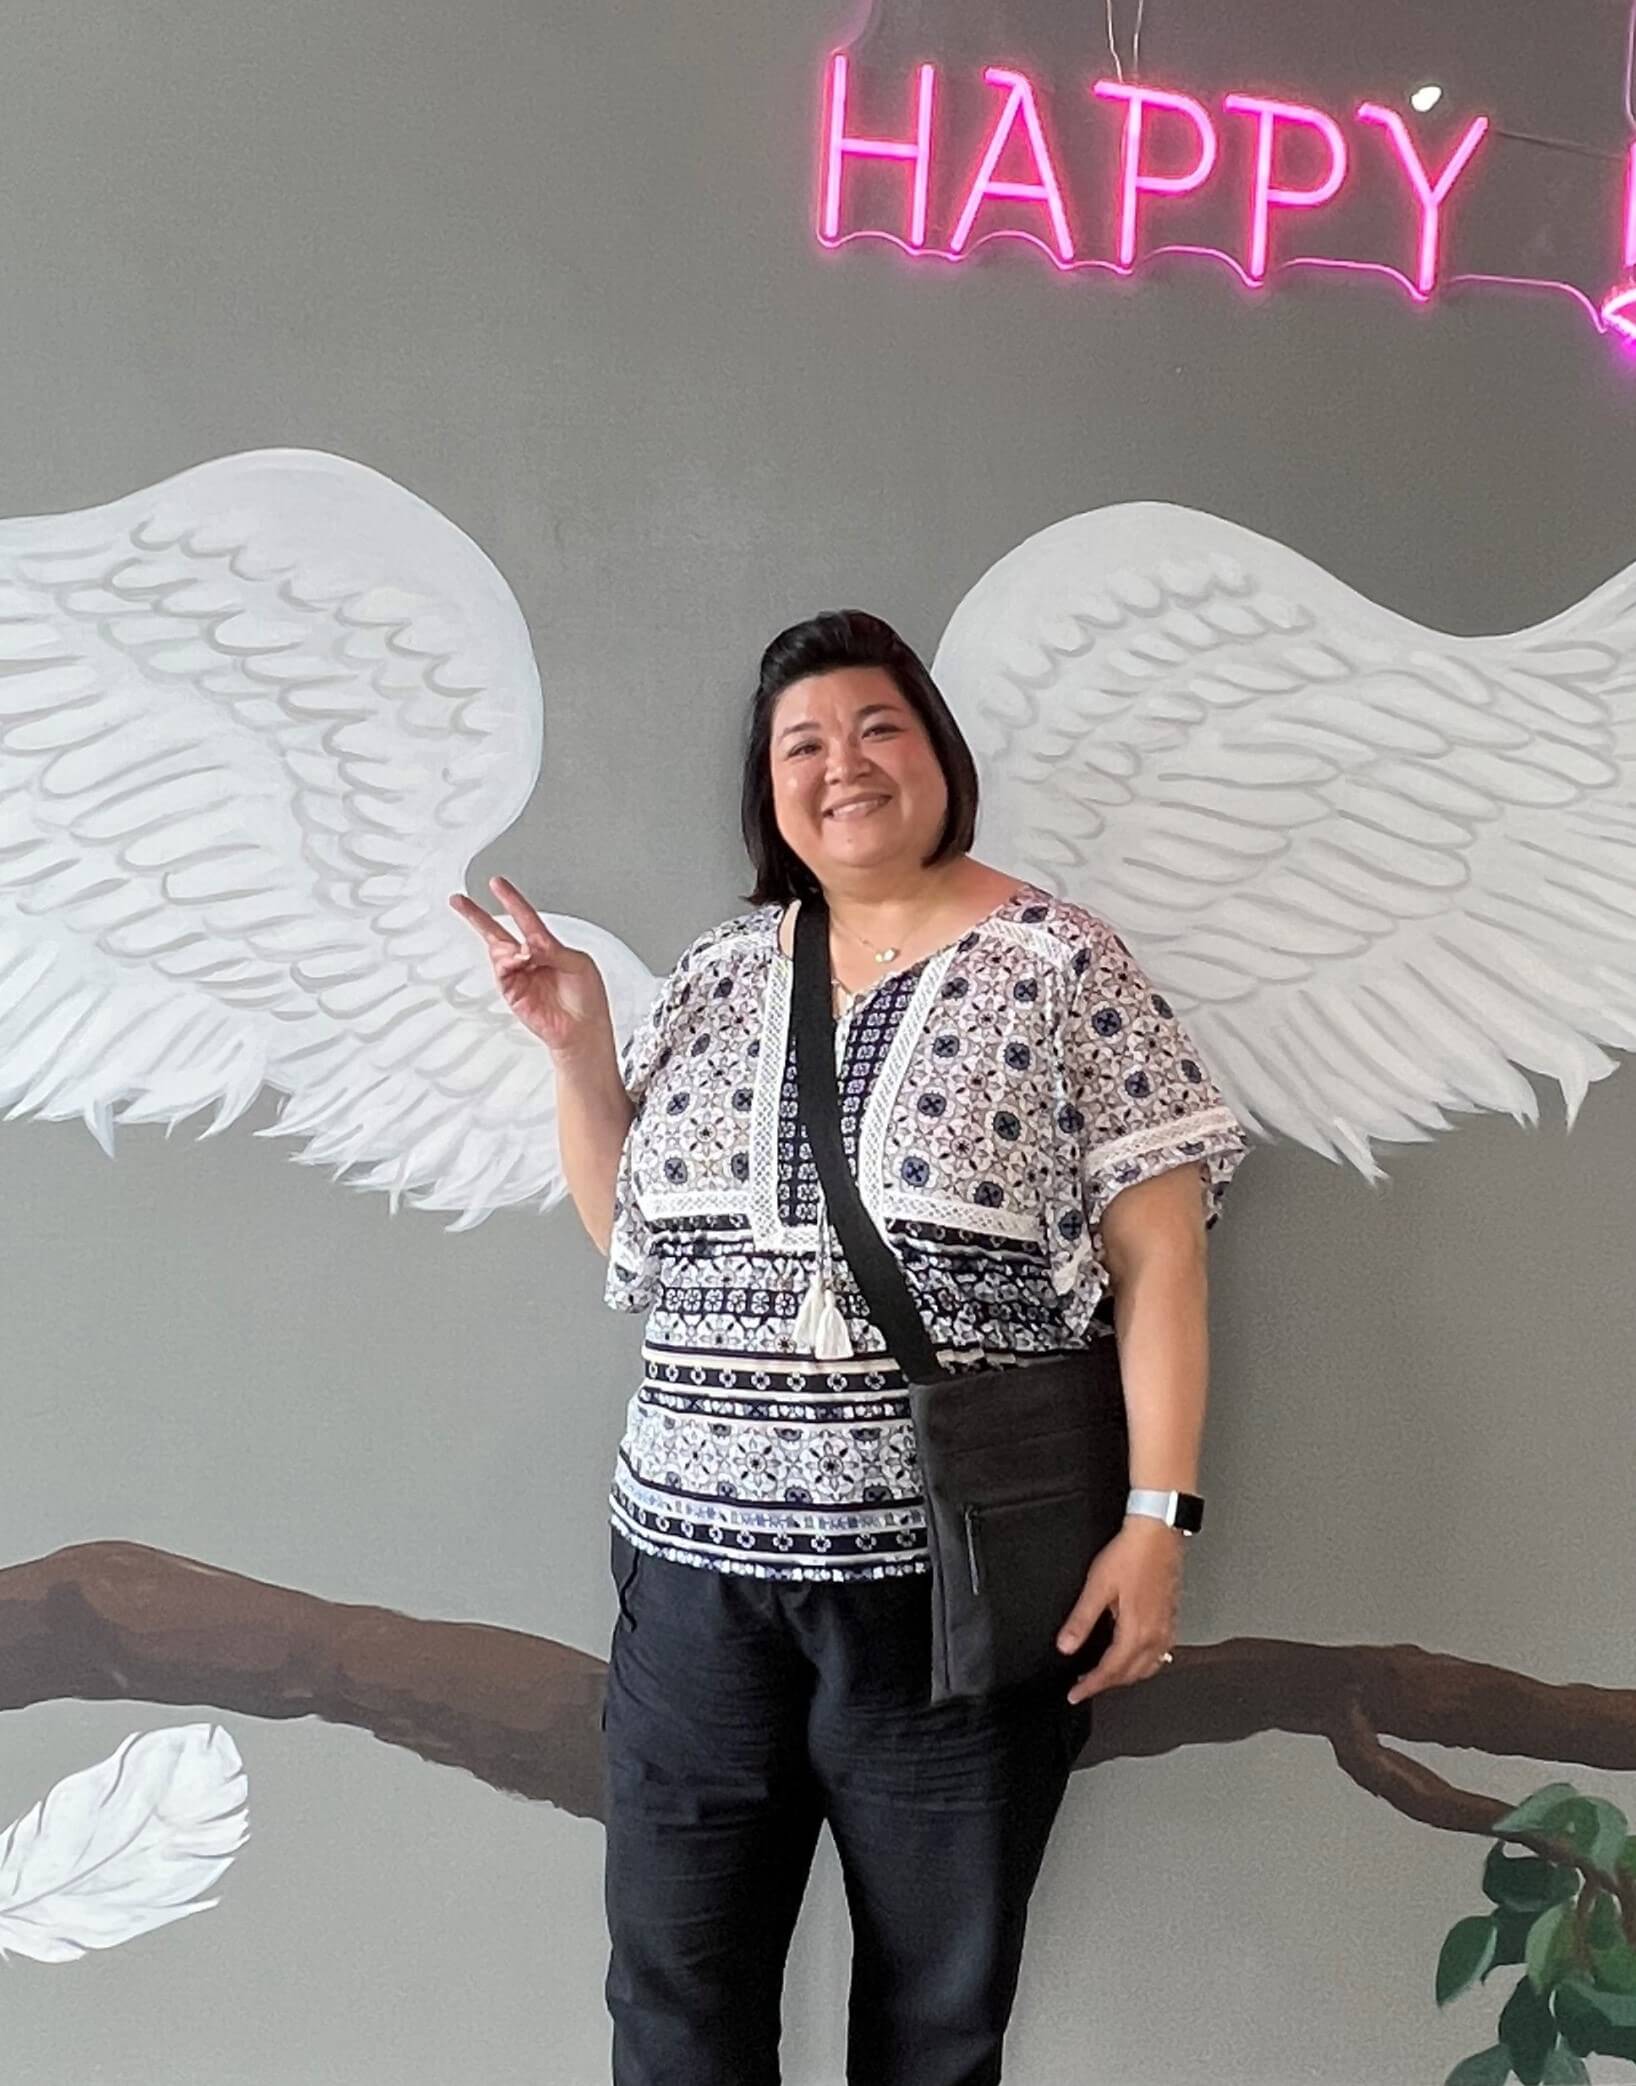 Sheri standing in front of a mural that gives her angel wings. She's smiling and has her fingers in a peace sign.